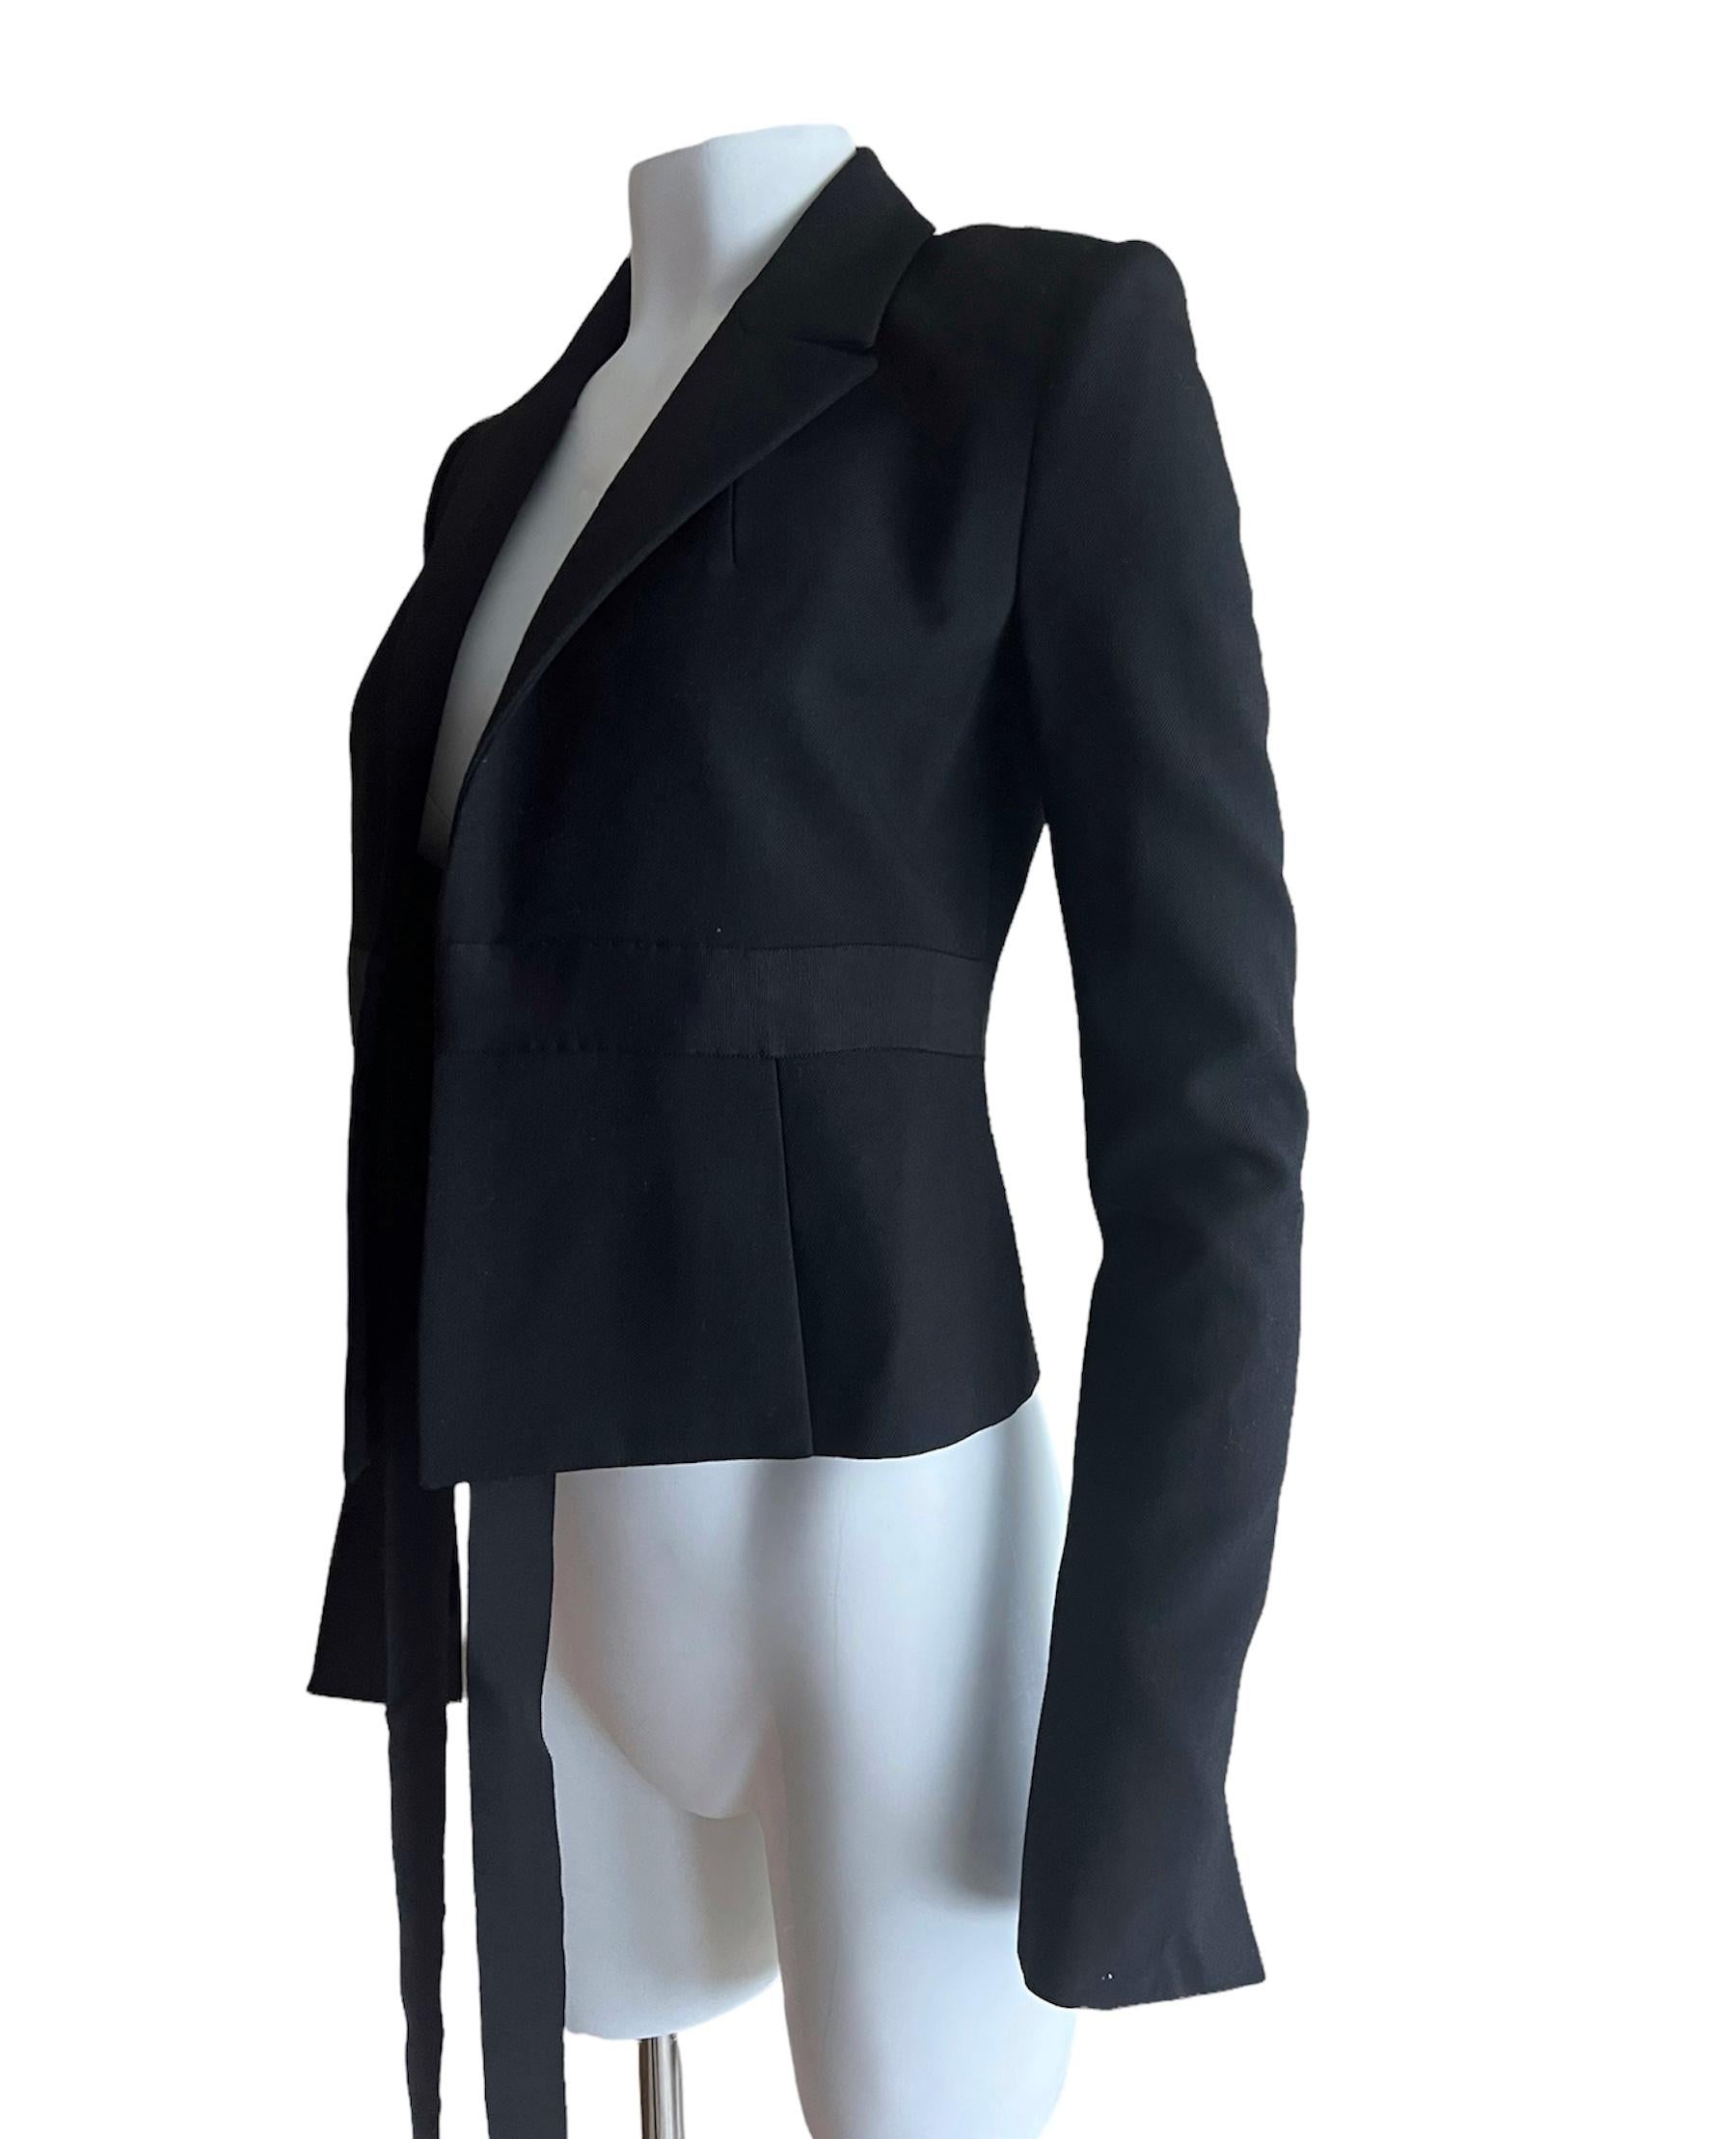 Bonnie Young Black Wool Blazer Jacket, Size 2 w/ Tags In New Condition For Sale In Beverly Hills, CA